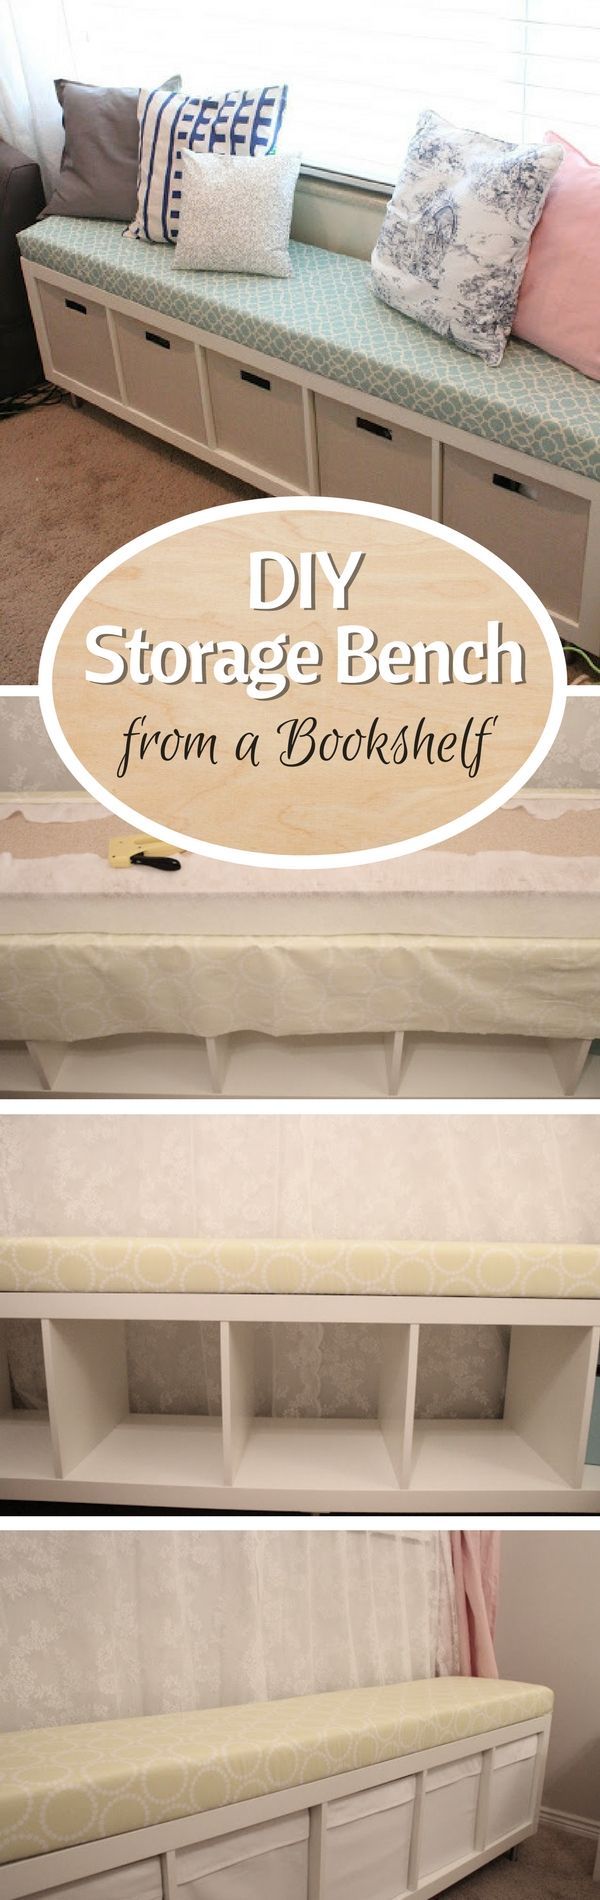 Check out how to turn a simple bookshelf into a DIY storage bench @istandarddesign